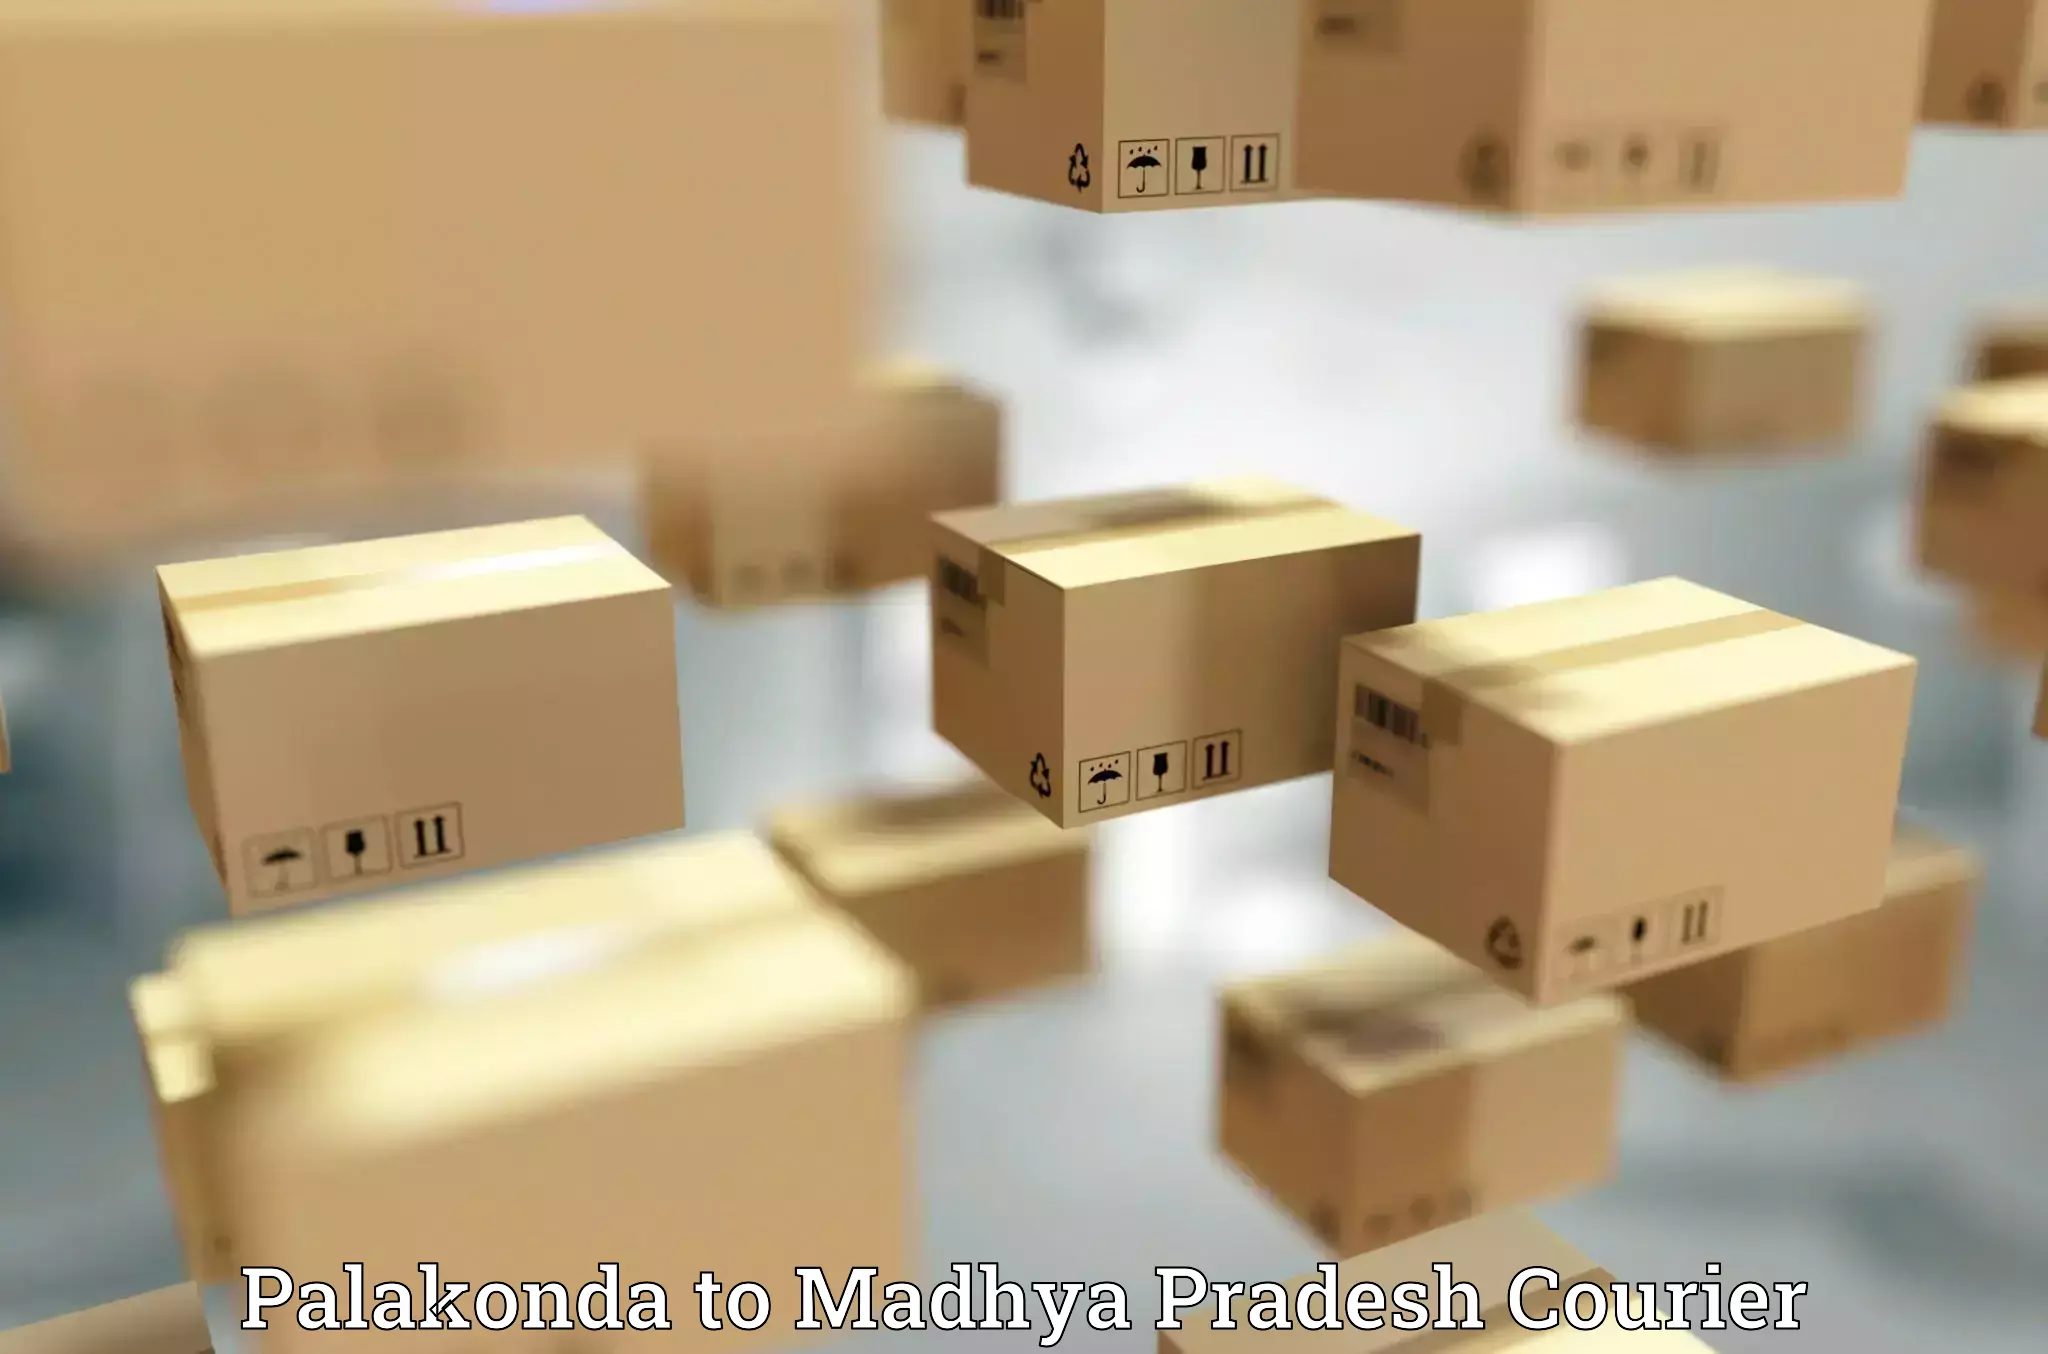 Express delivery network in Palakonda to Indore